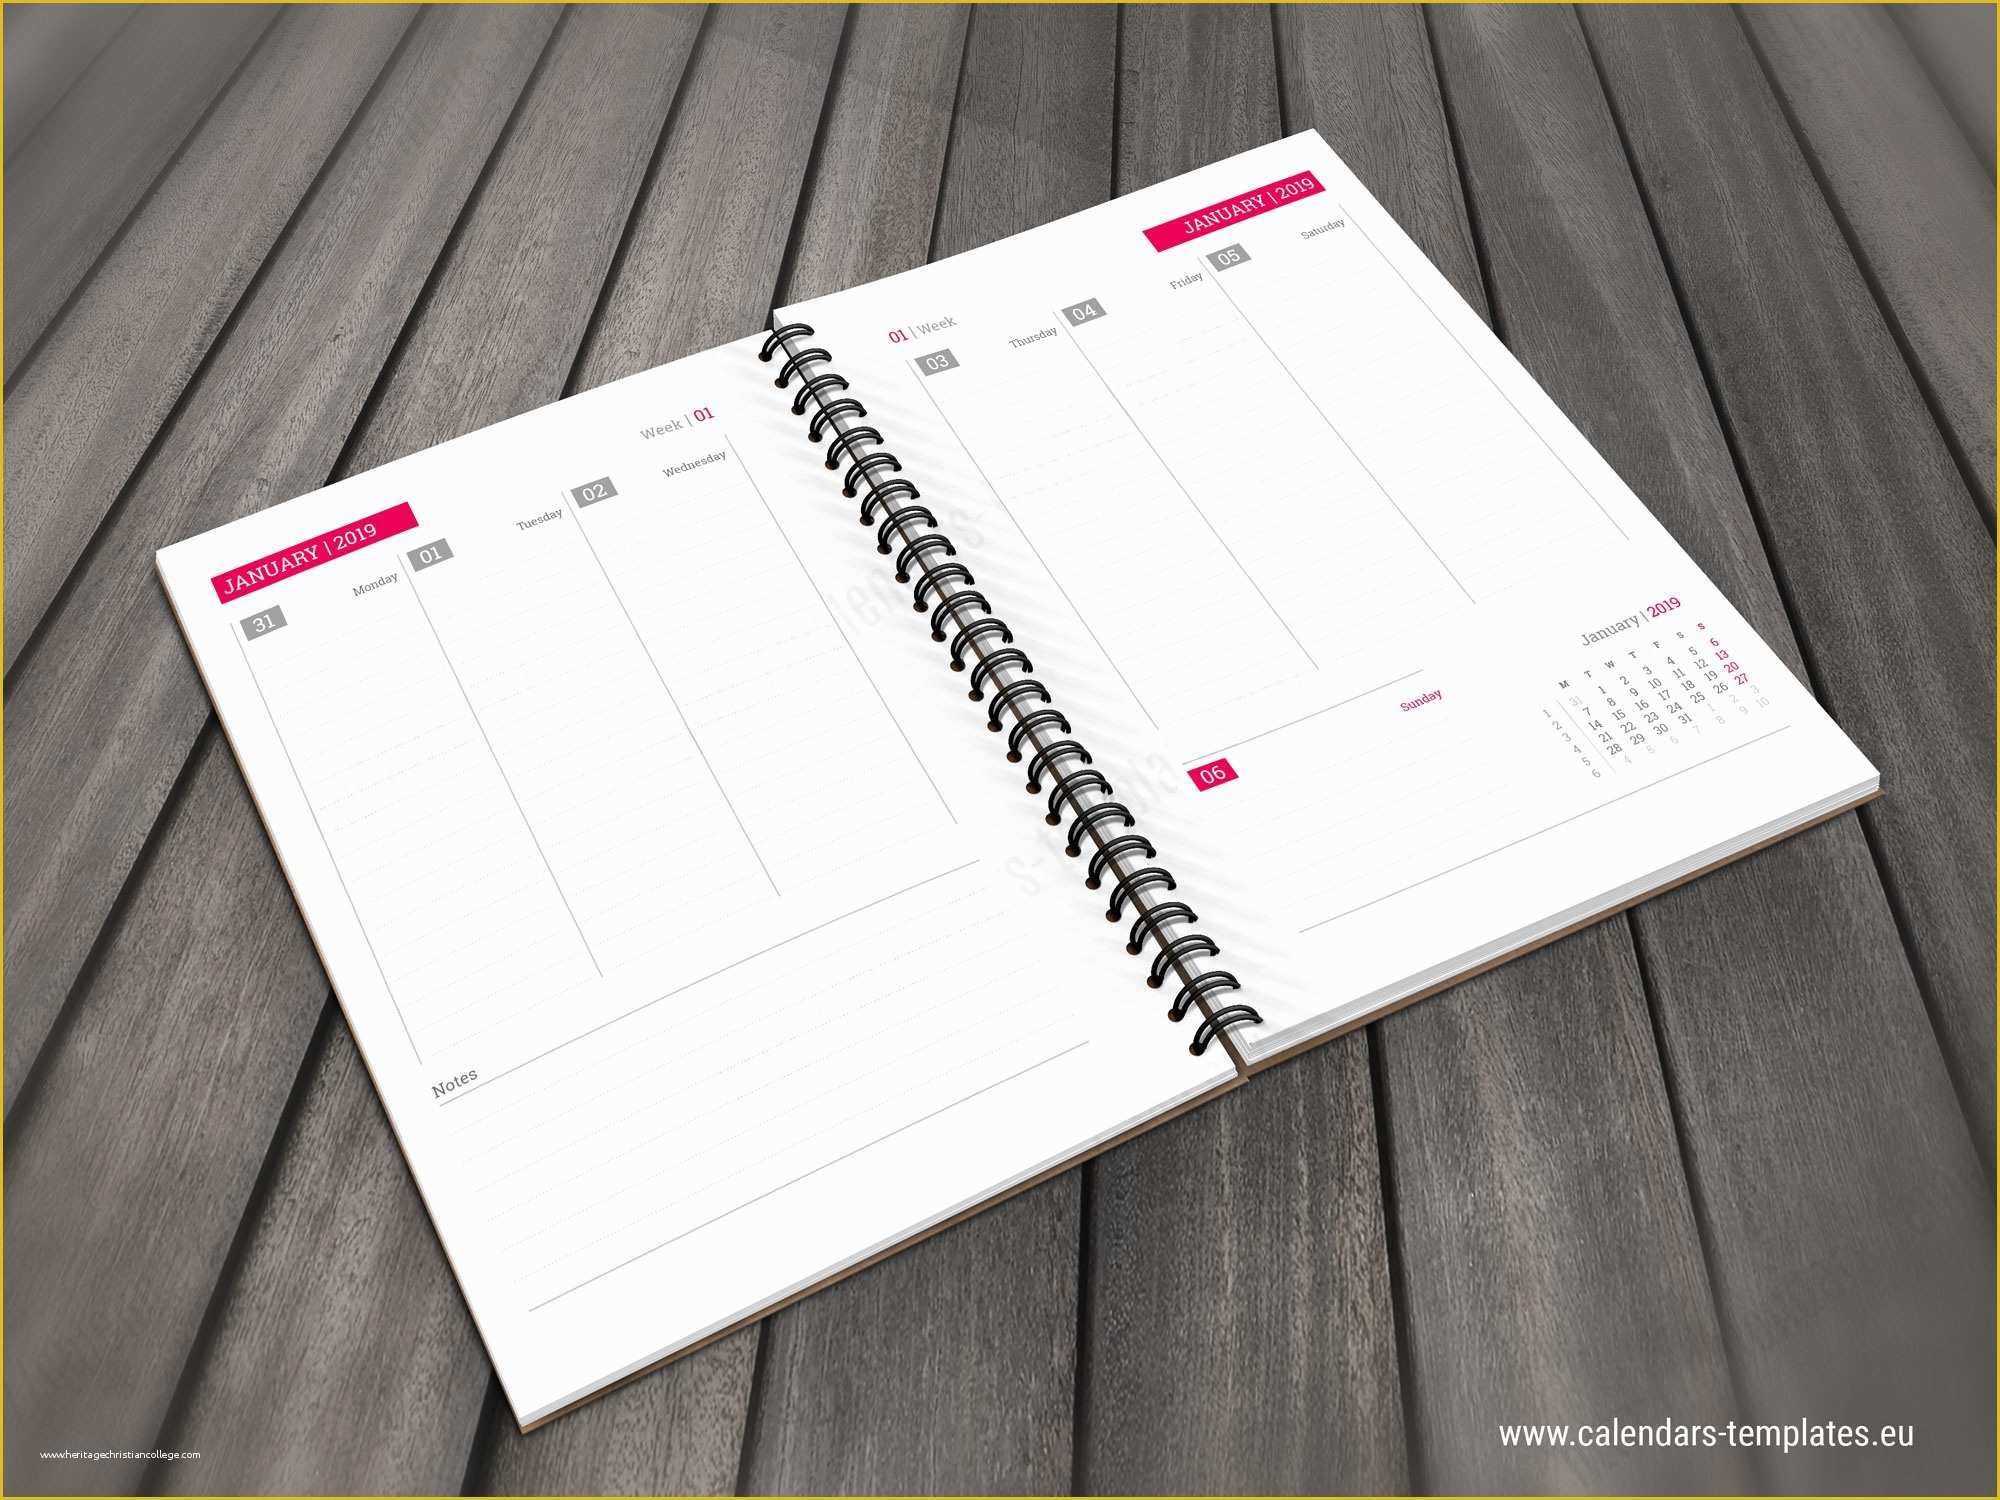 Indesign Planner Template 2018 Free Of Daily Planner Template In Pdf and Indesign format for 2019